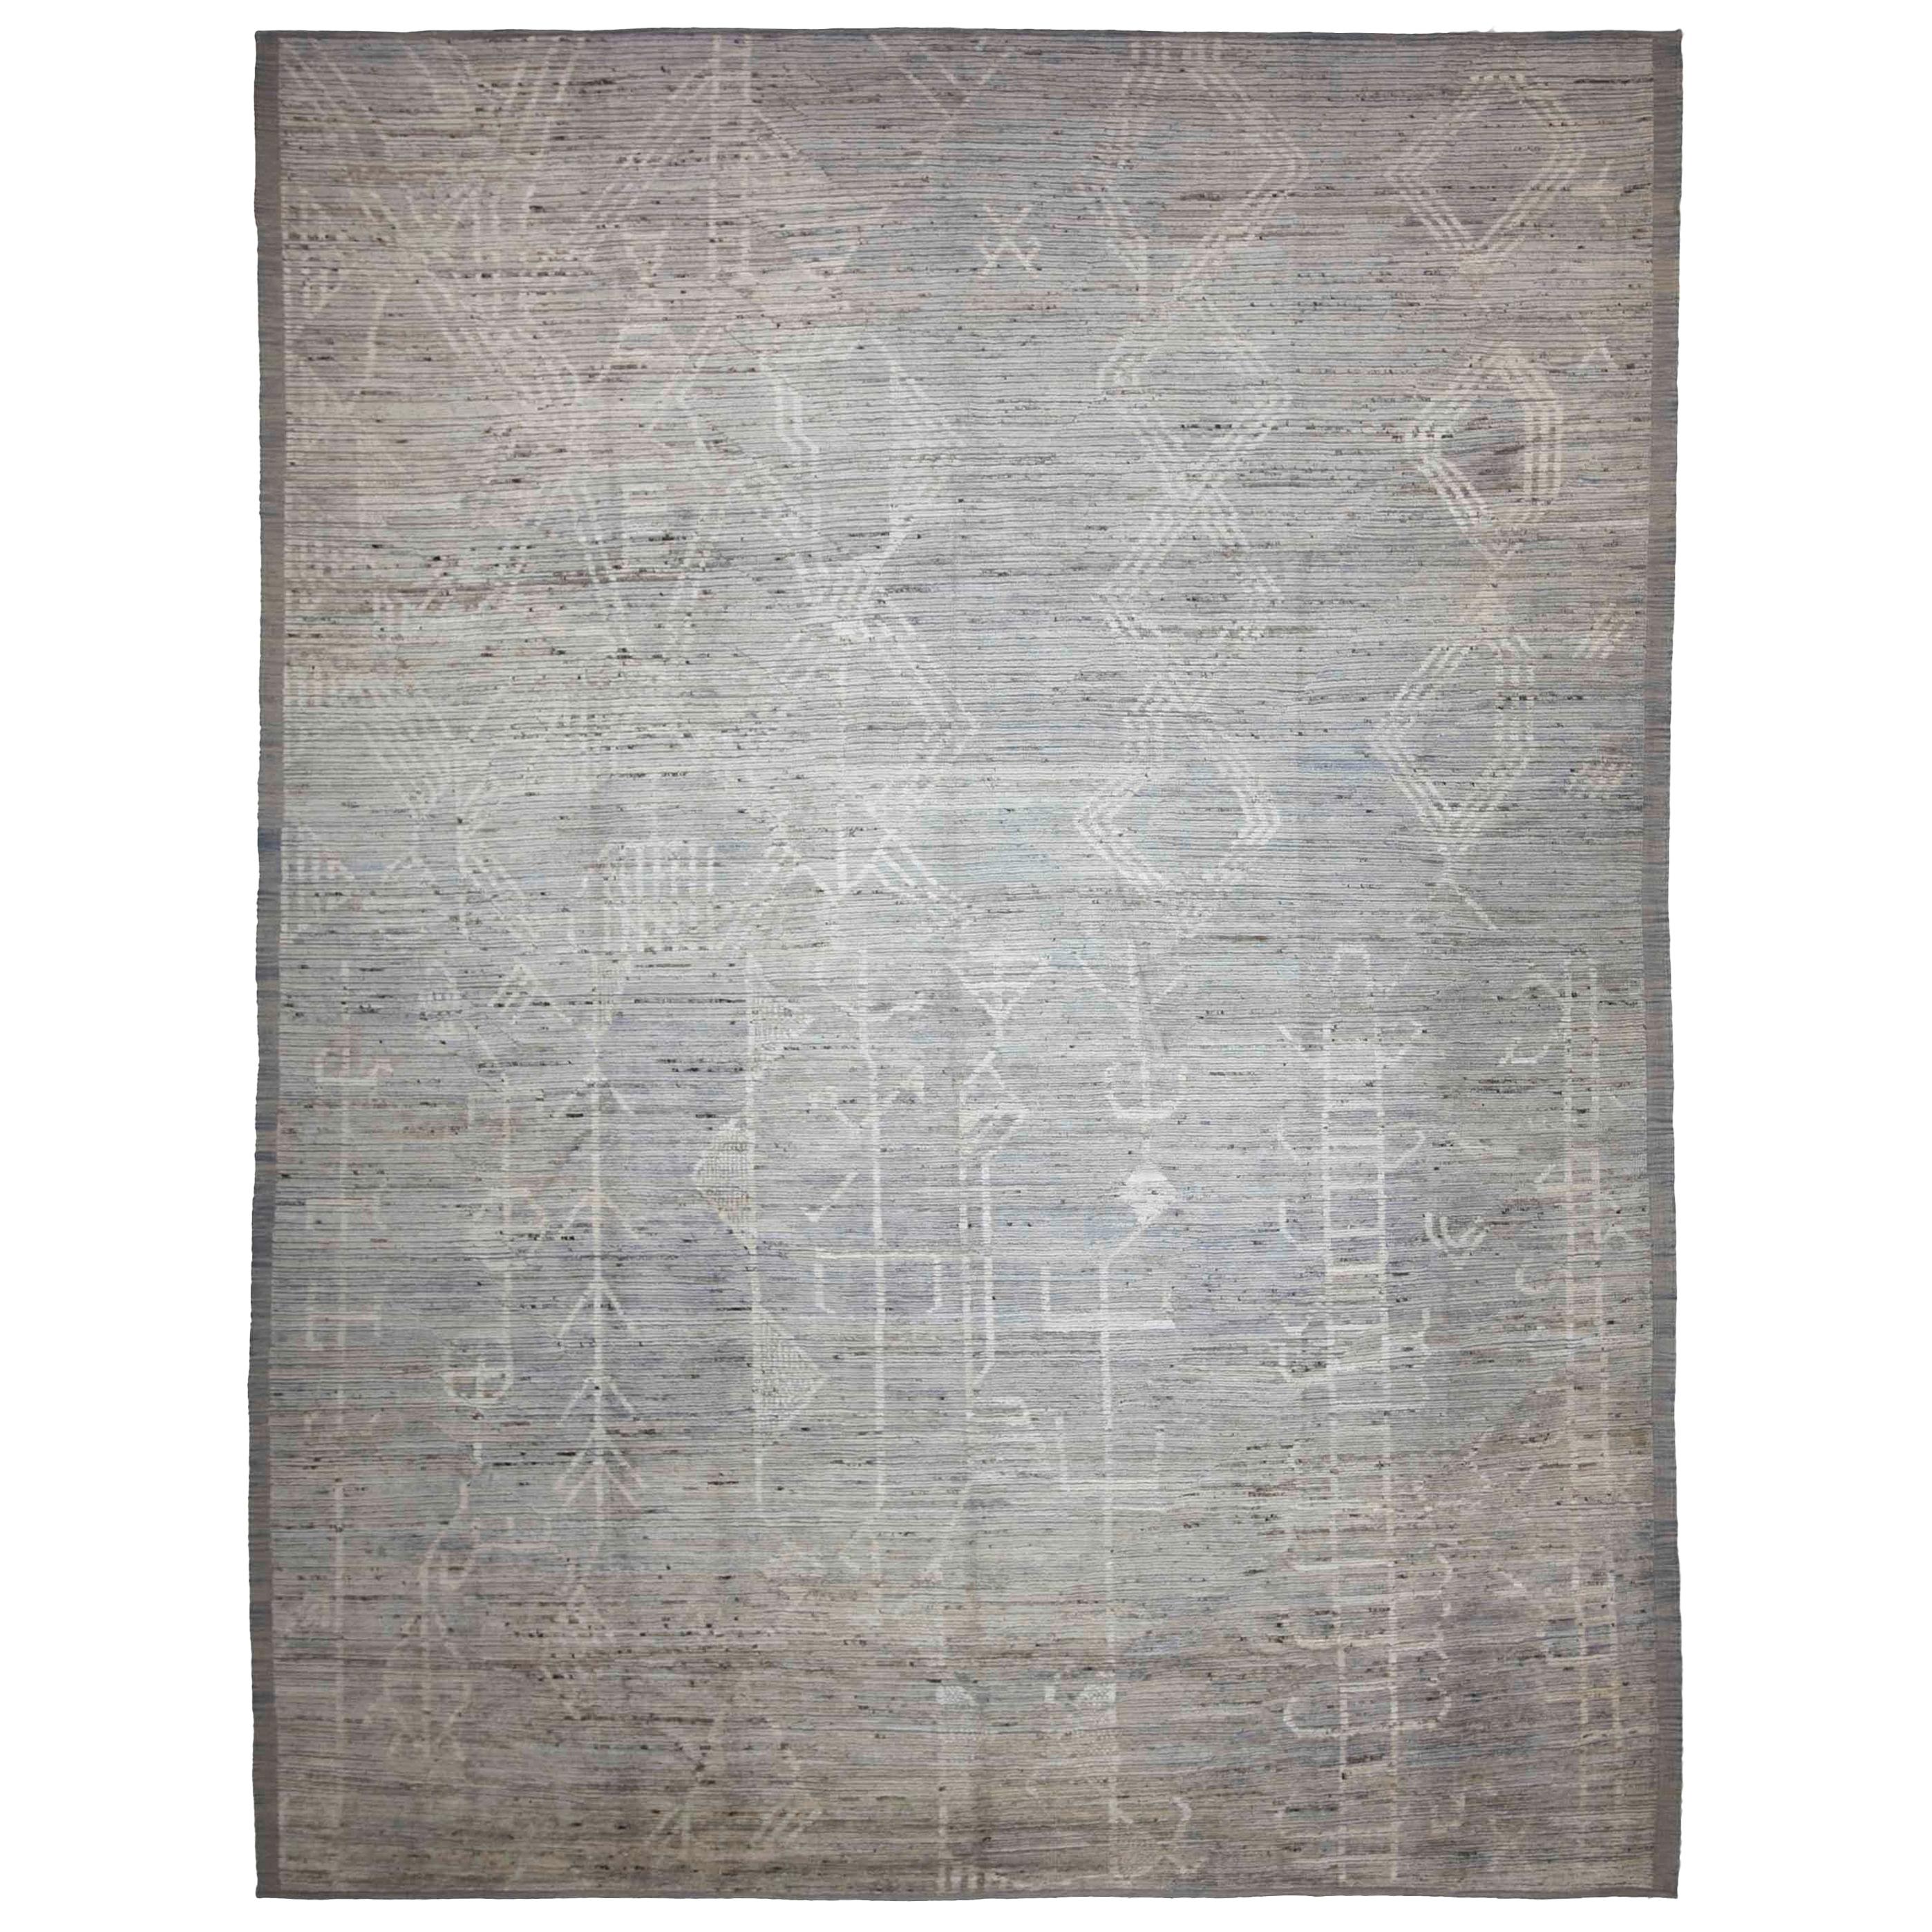 Afghan Moroccan Style Rug with Ivory Tribal Details on Gray and Beige Field For Sale